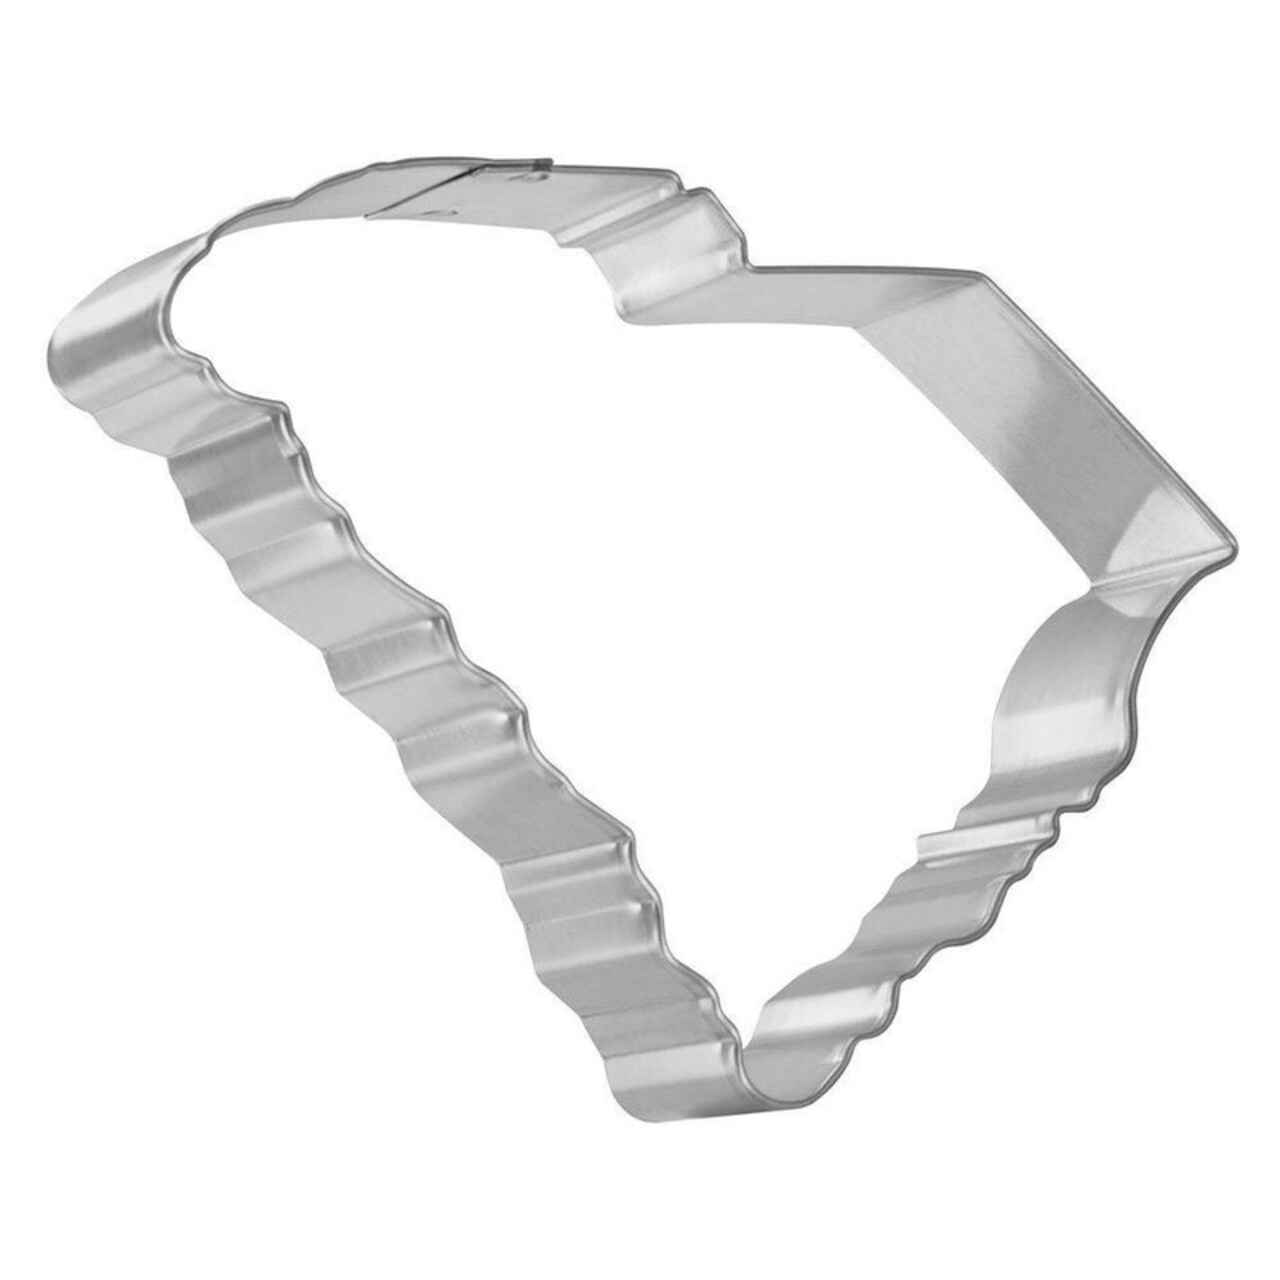 South Carolina Cookie Cutter 4 in, CookieCutter.com, Tin Plated Steel, Handmade in the USA